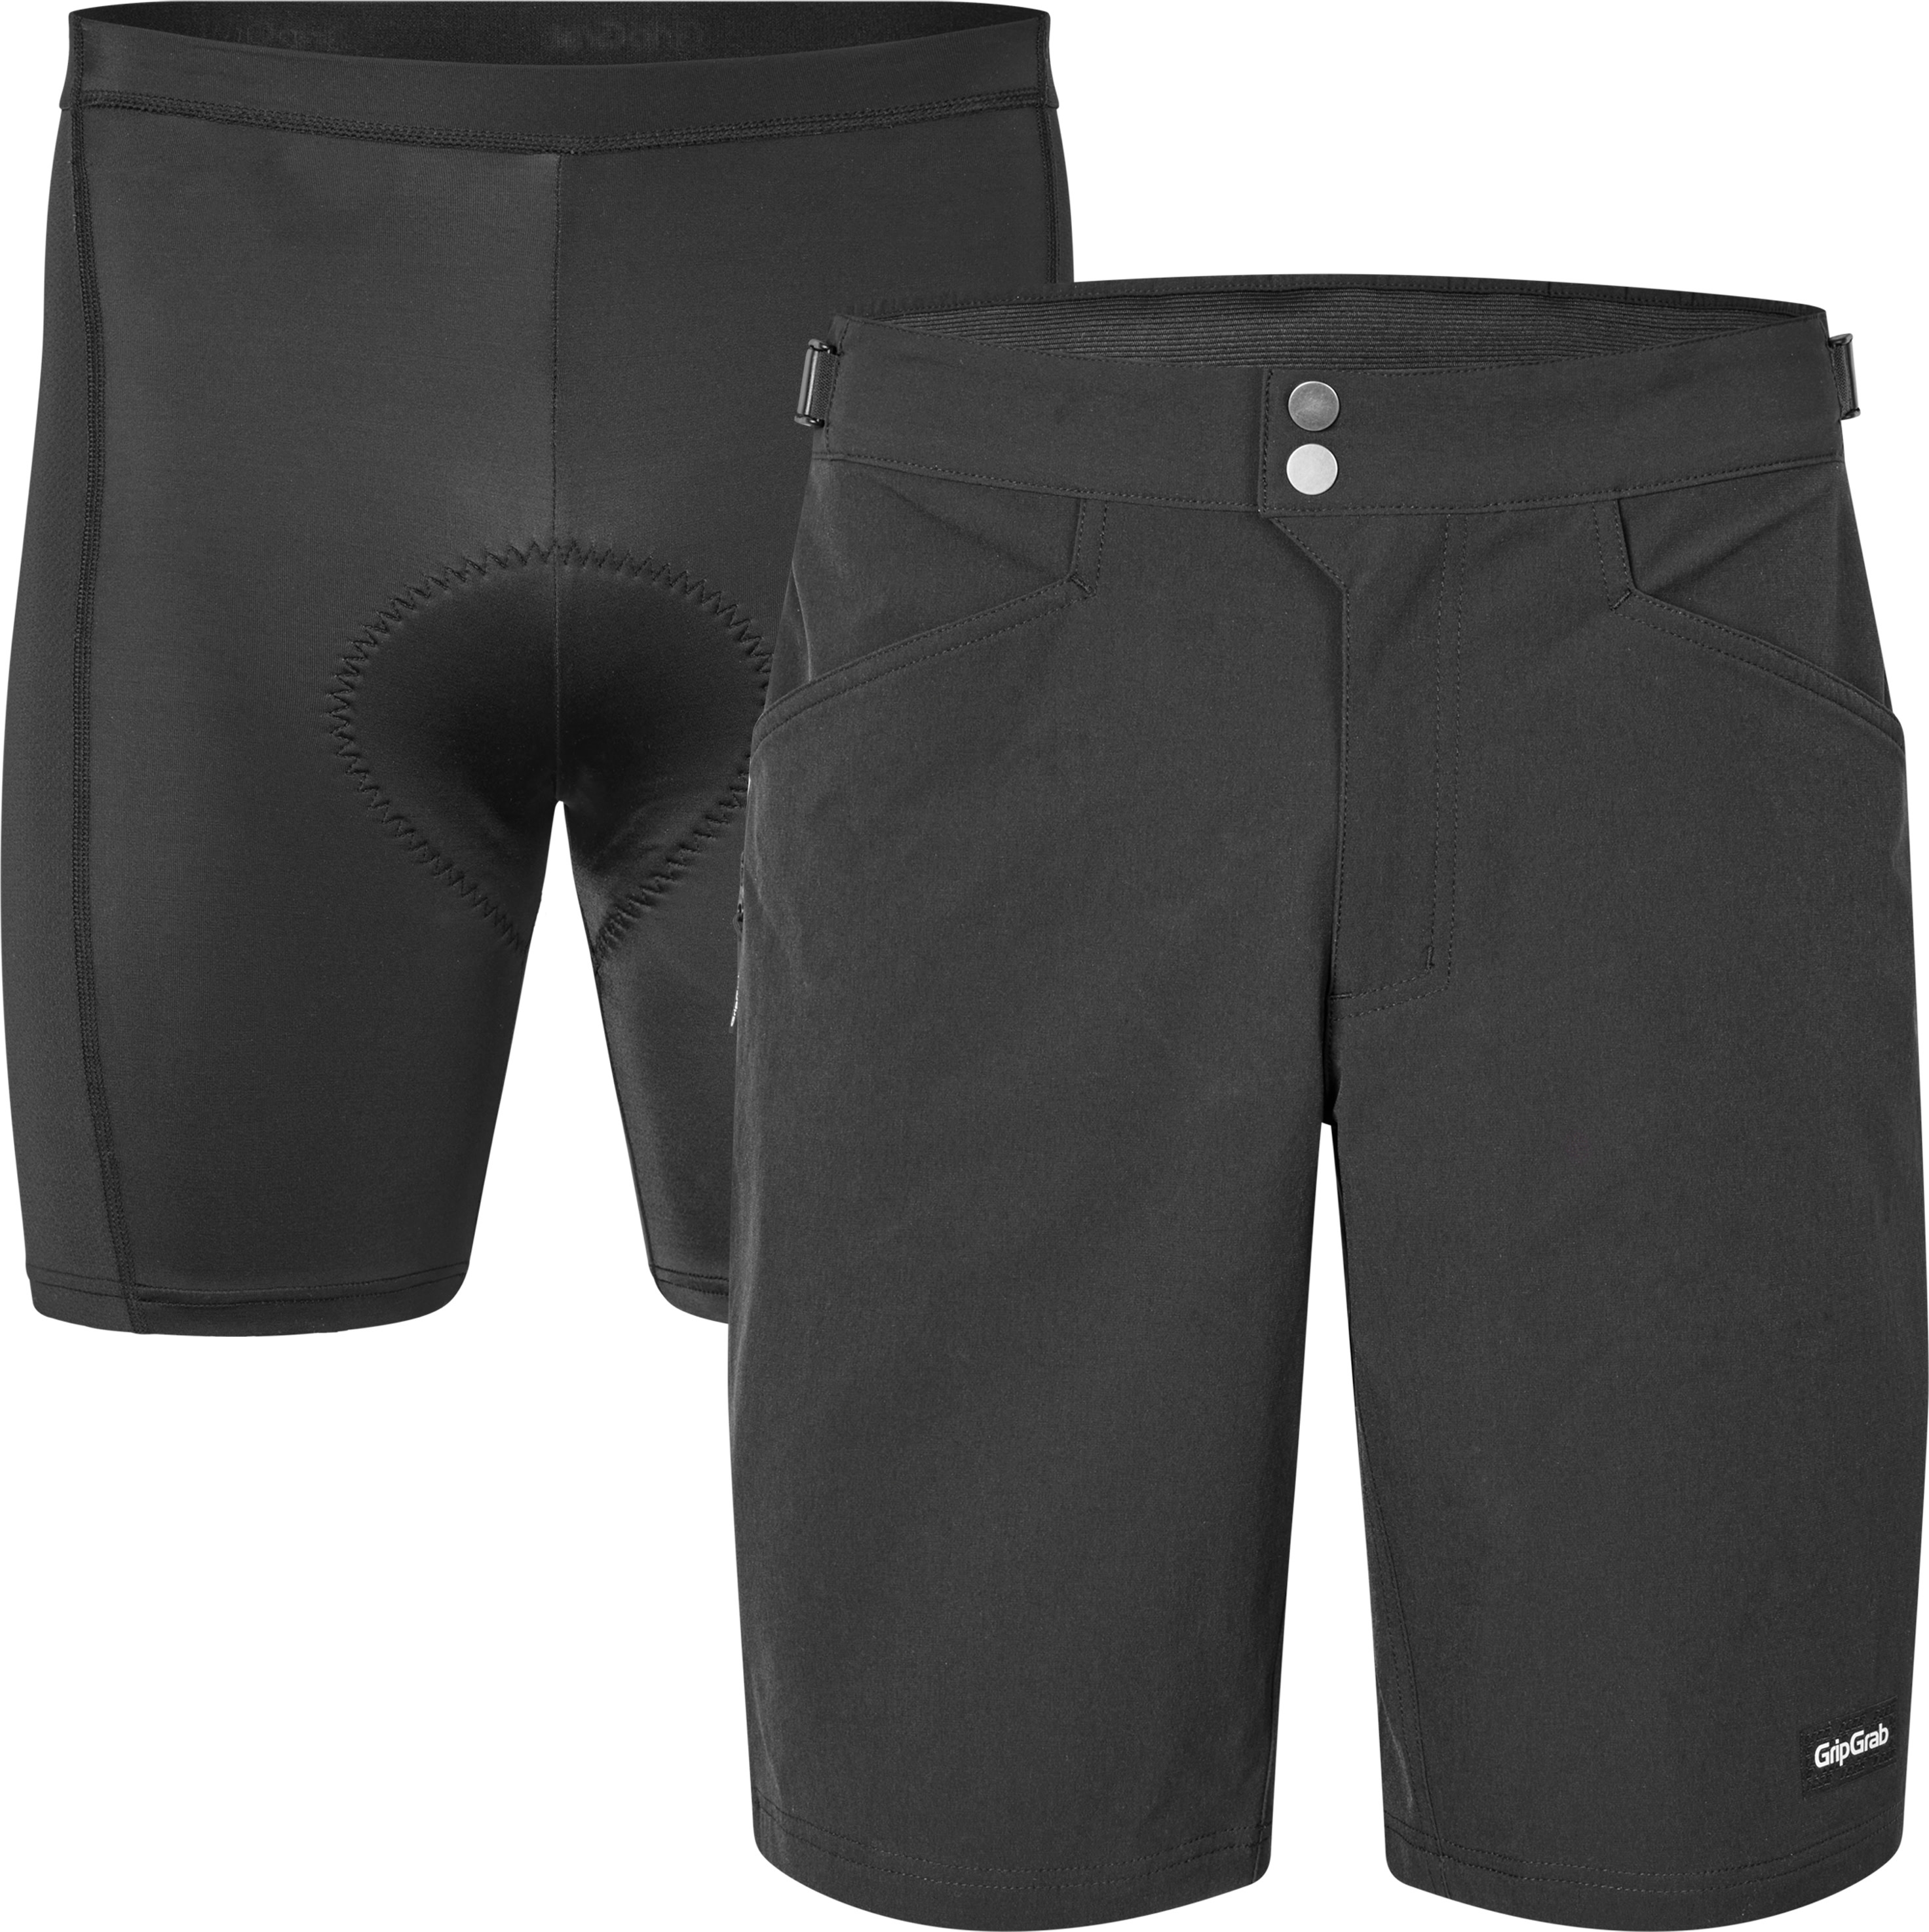 Gripgrab Men’s Flow 2in1 Technical Cycling Shorts Black